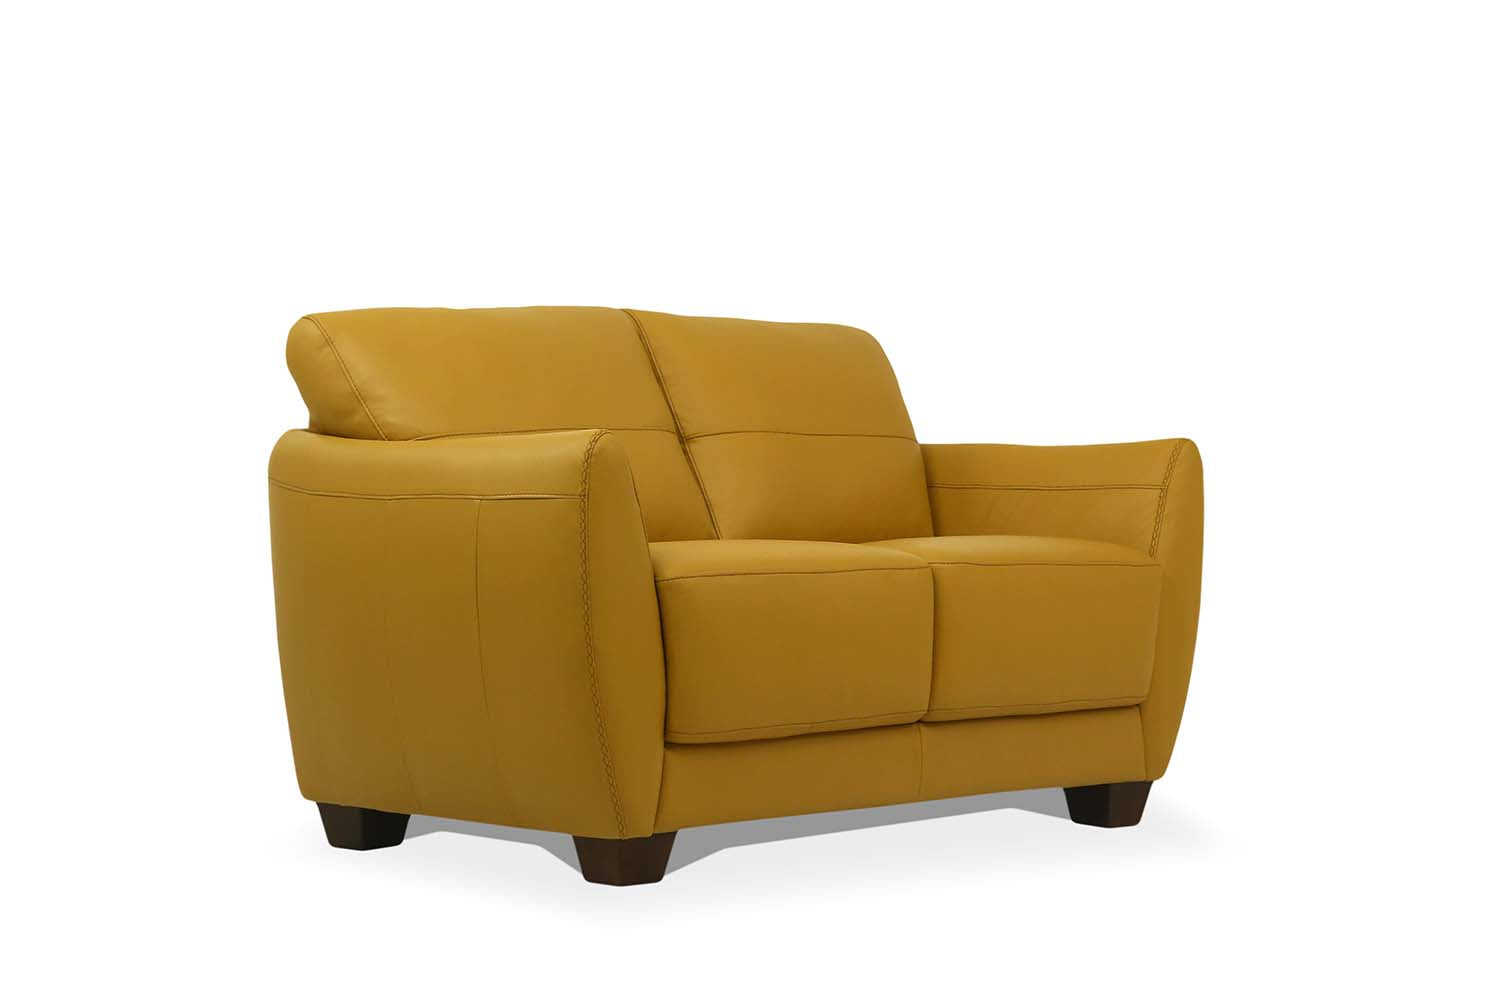 ACME Furniture Sofas & Couches - Loveseat, Mustard Leather 54946